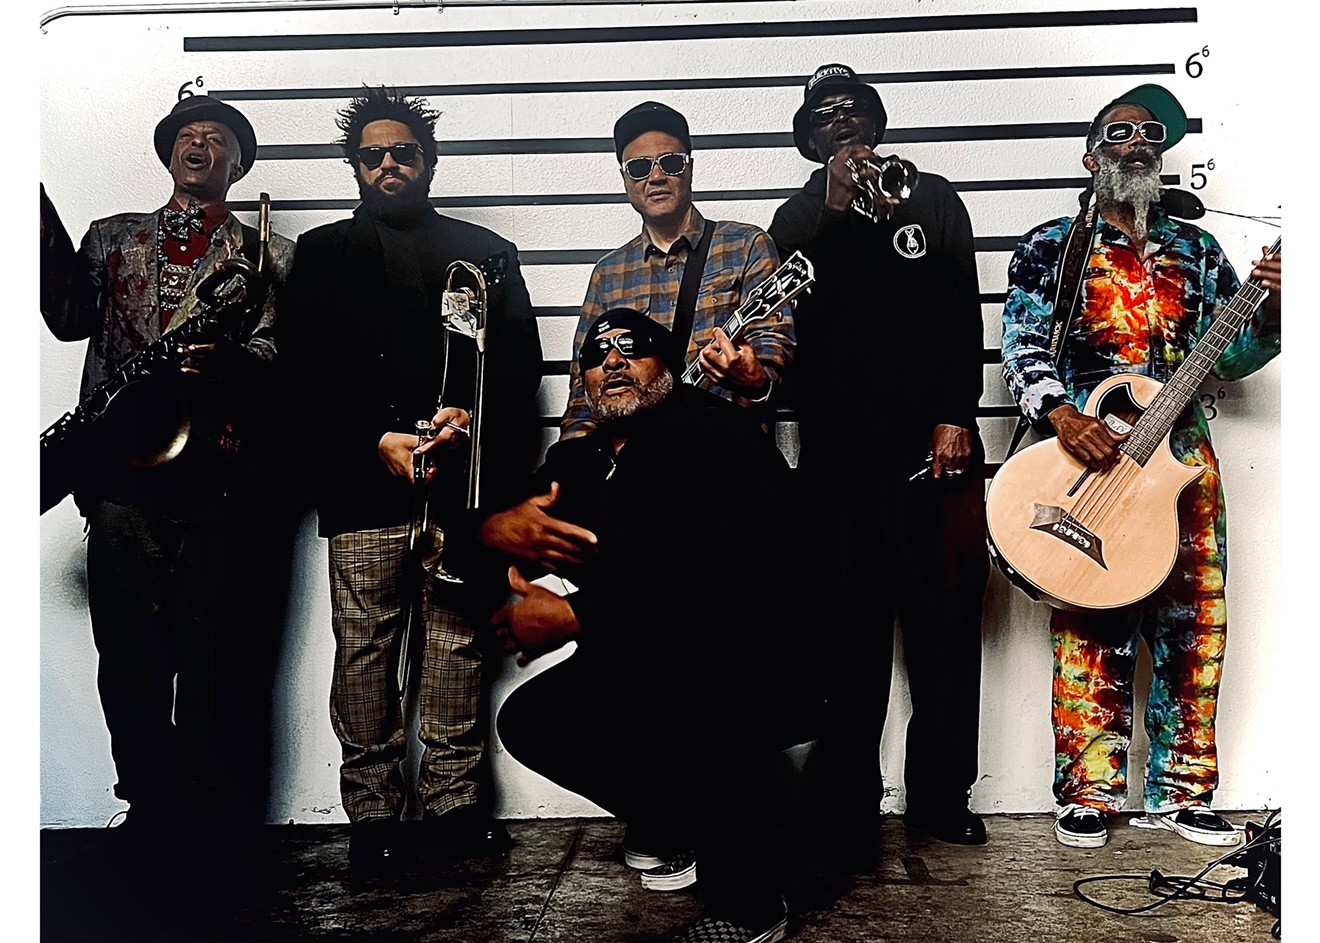 From left to right: Fishbone Members Angelo Moore, Chris Dowd, John Steward, Mark Phillips, Walter A. Kibby II and Norwood Fisher